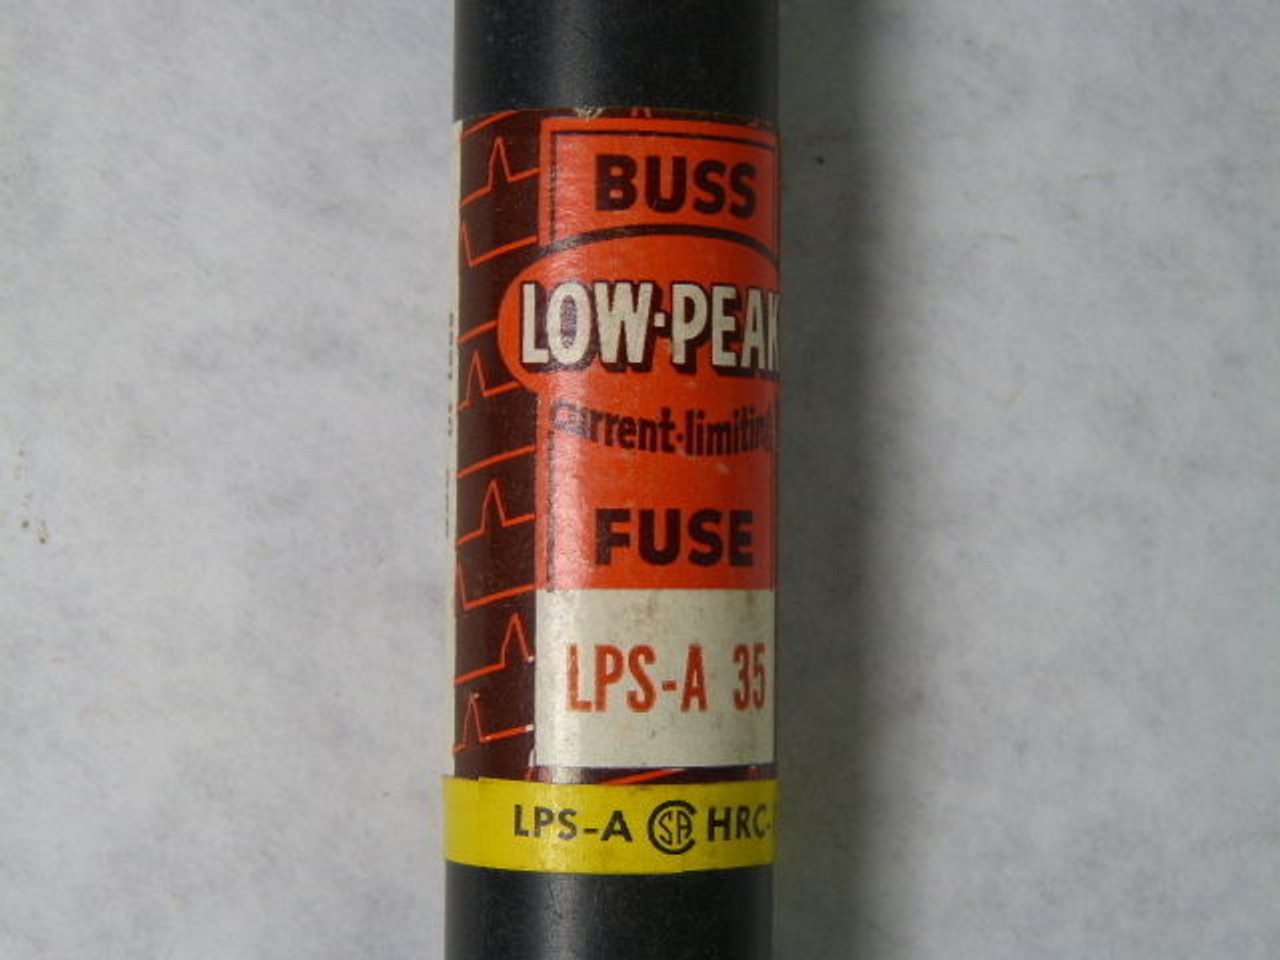 Low-Peak LPS-A-35 Current Limiting Fuse 35A USED